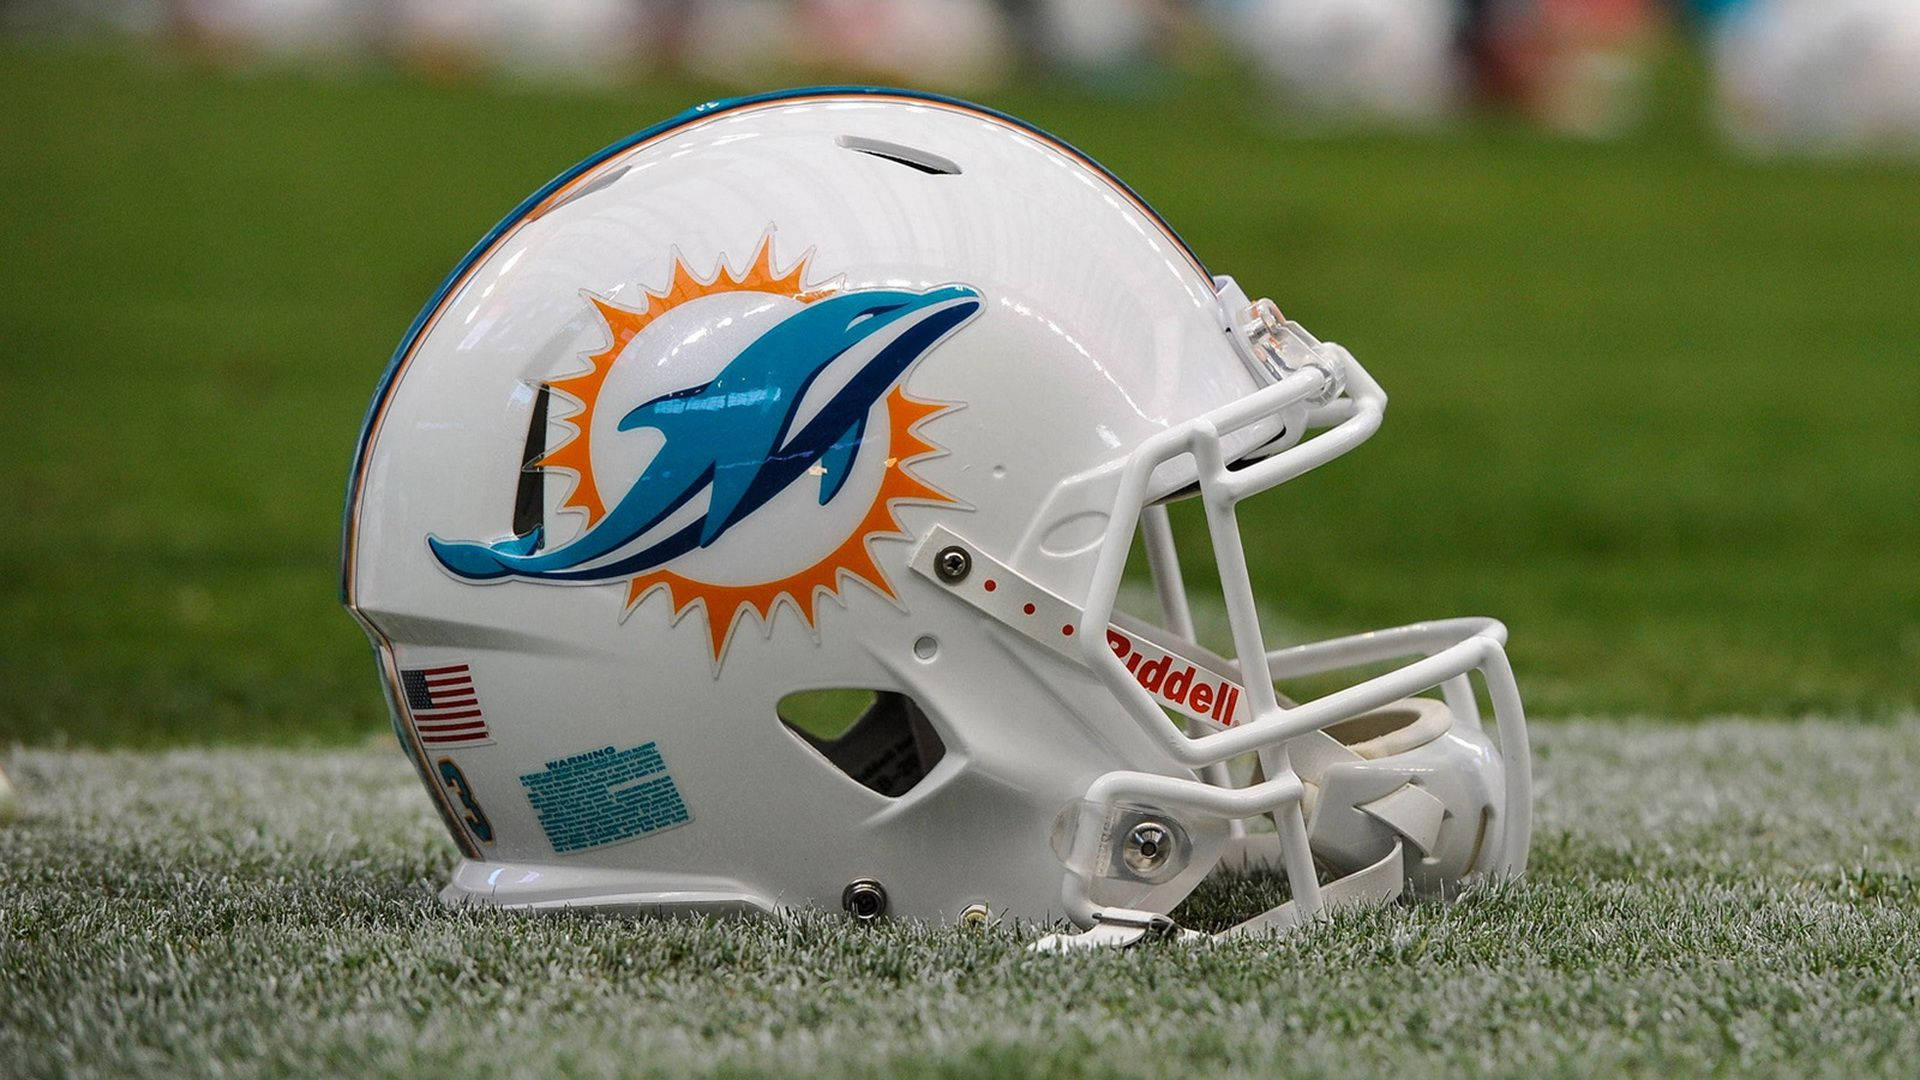 1920X1080 Miami Dolphins Wallpaper and Background